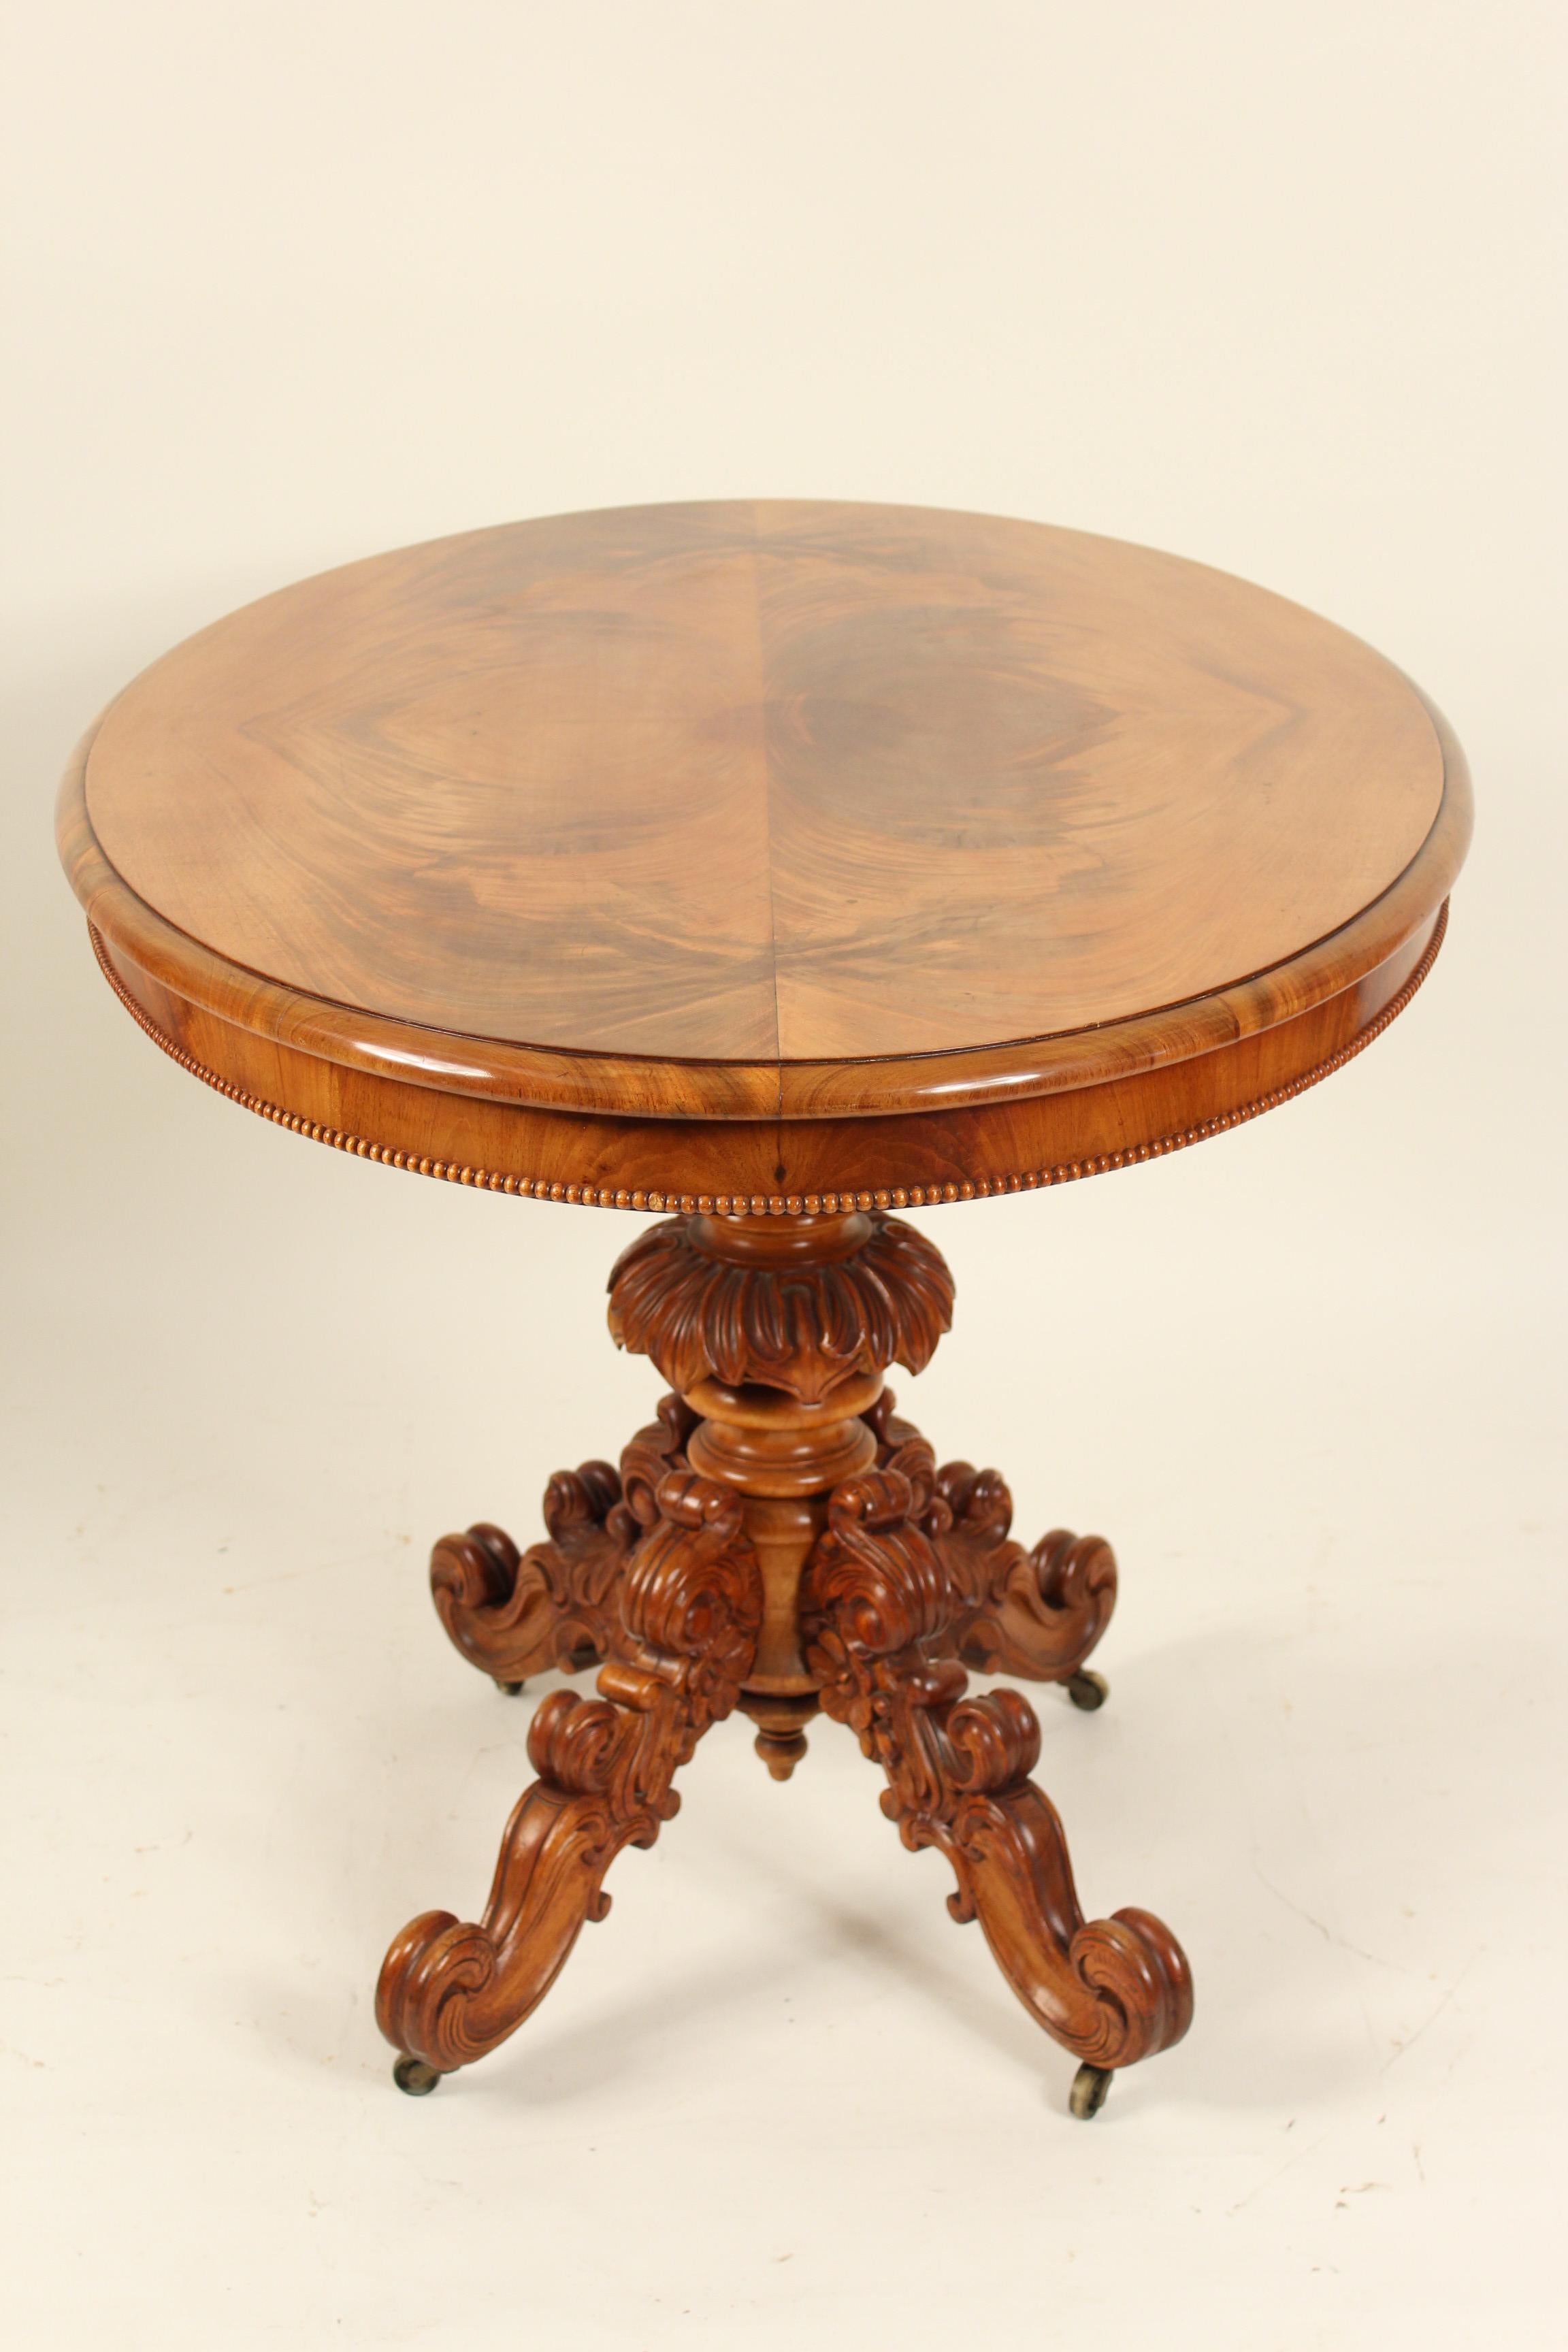 Victorian English Loo Table with Flame Mahogany Top